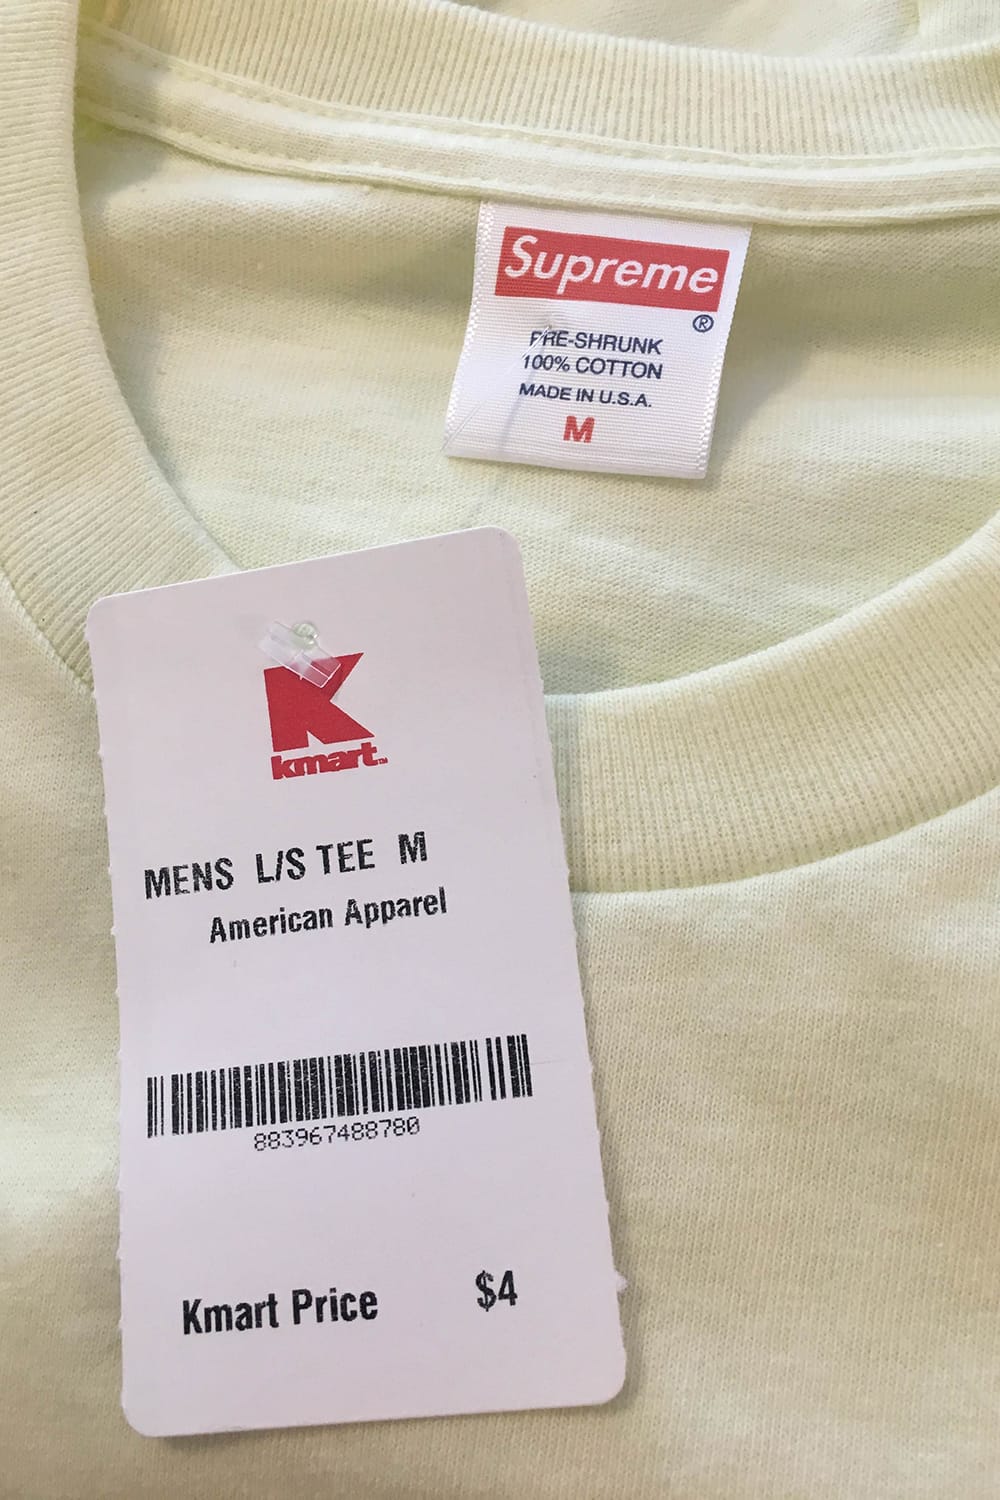 Supreme T-Shirts Found In K-Mart Selling For $4 | Hypebeast